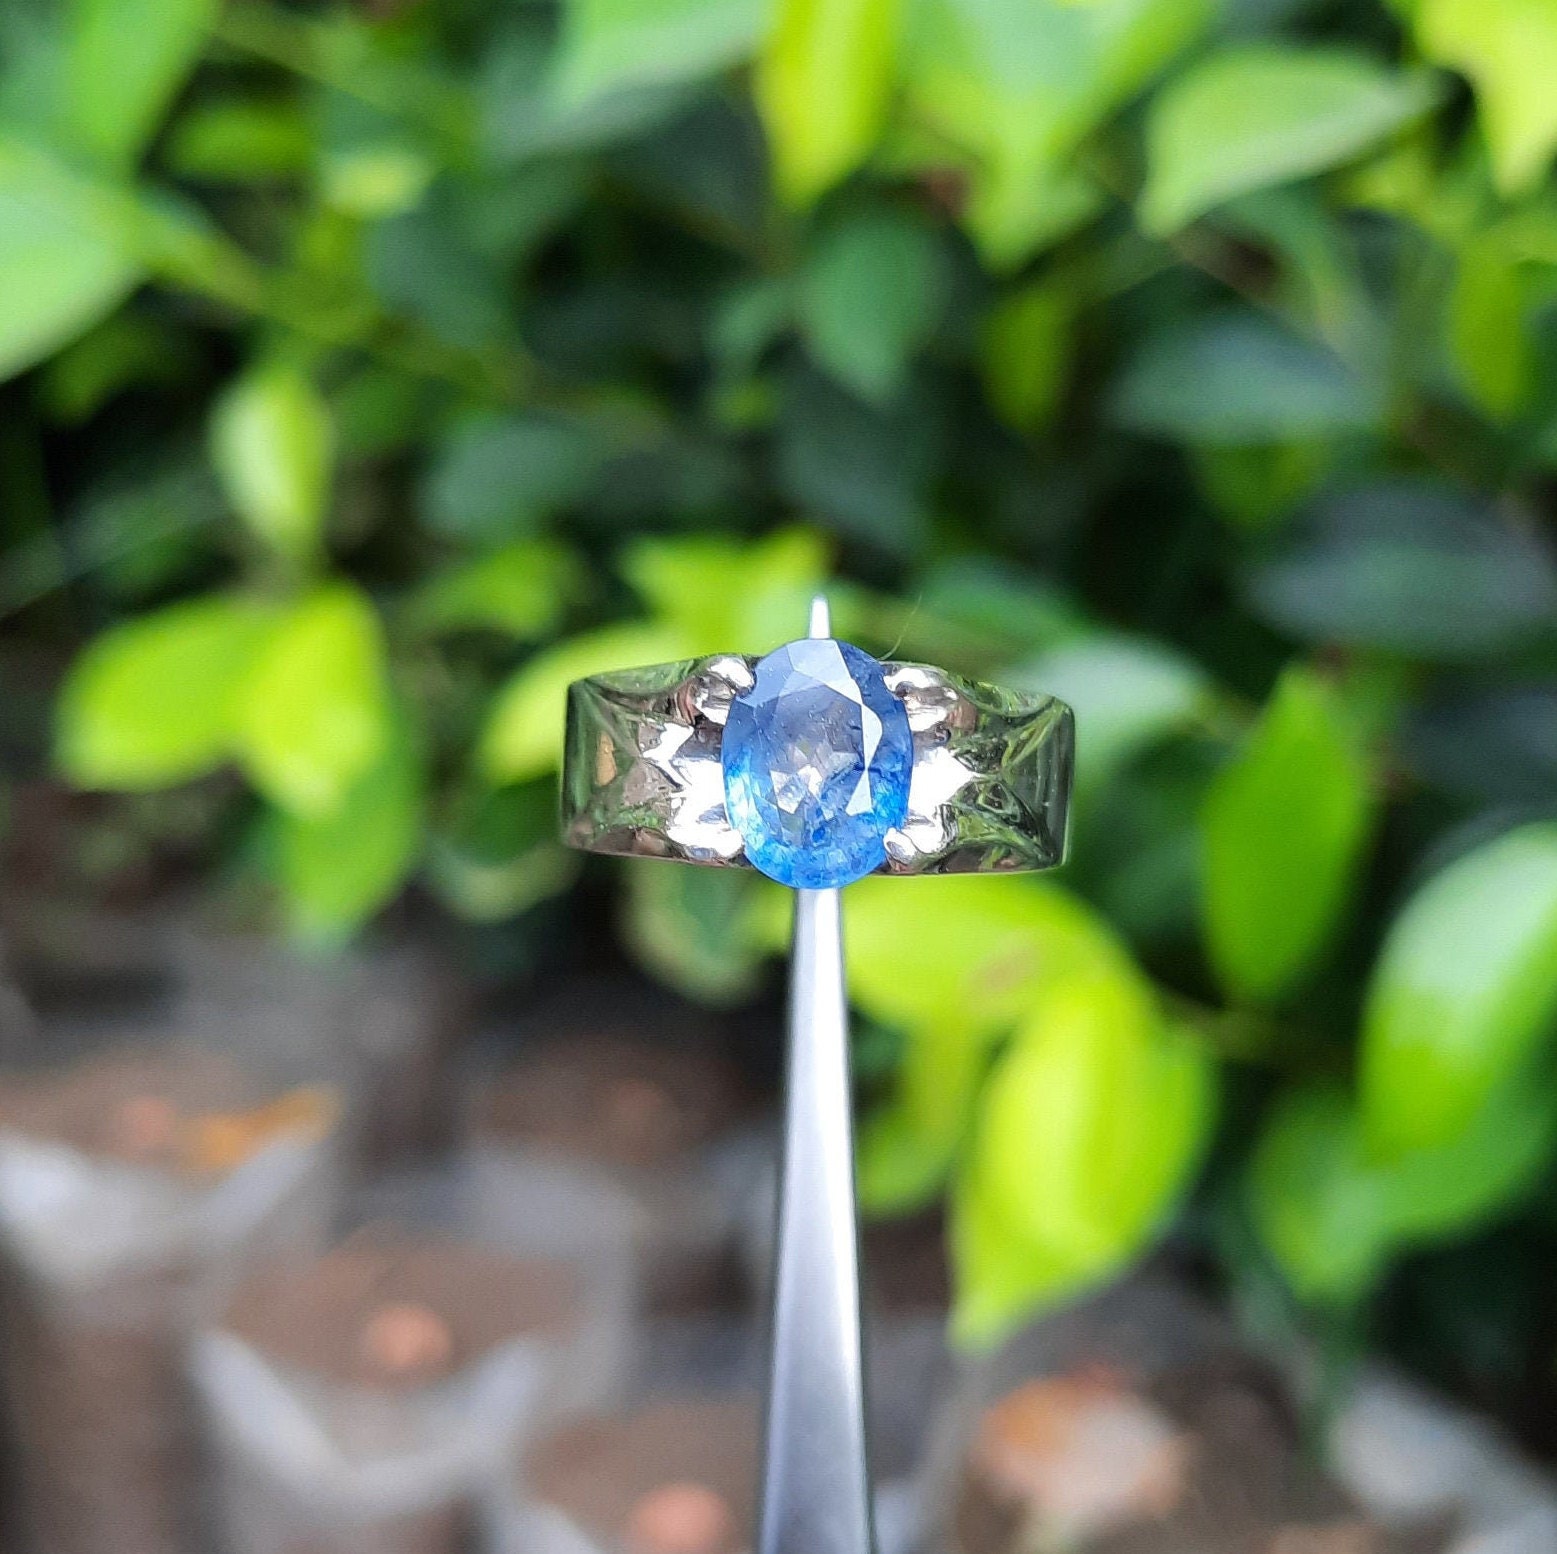 Buy Neelam Stone Original Certified Neelam Stone Blue Sapphire Ring  Adjustable Woman Man Ring With Lab Certificate Online at Best Prices in  India - JioMart.